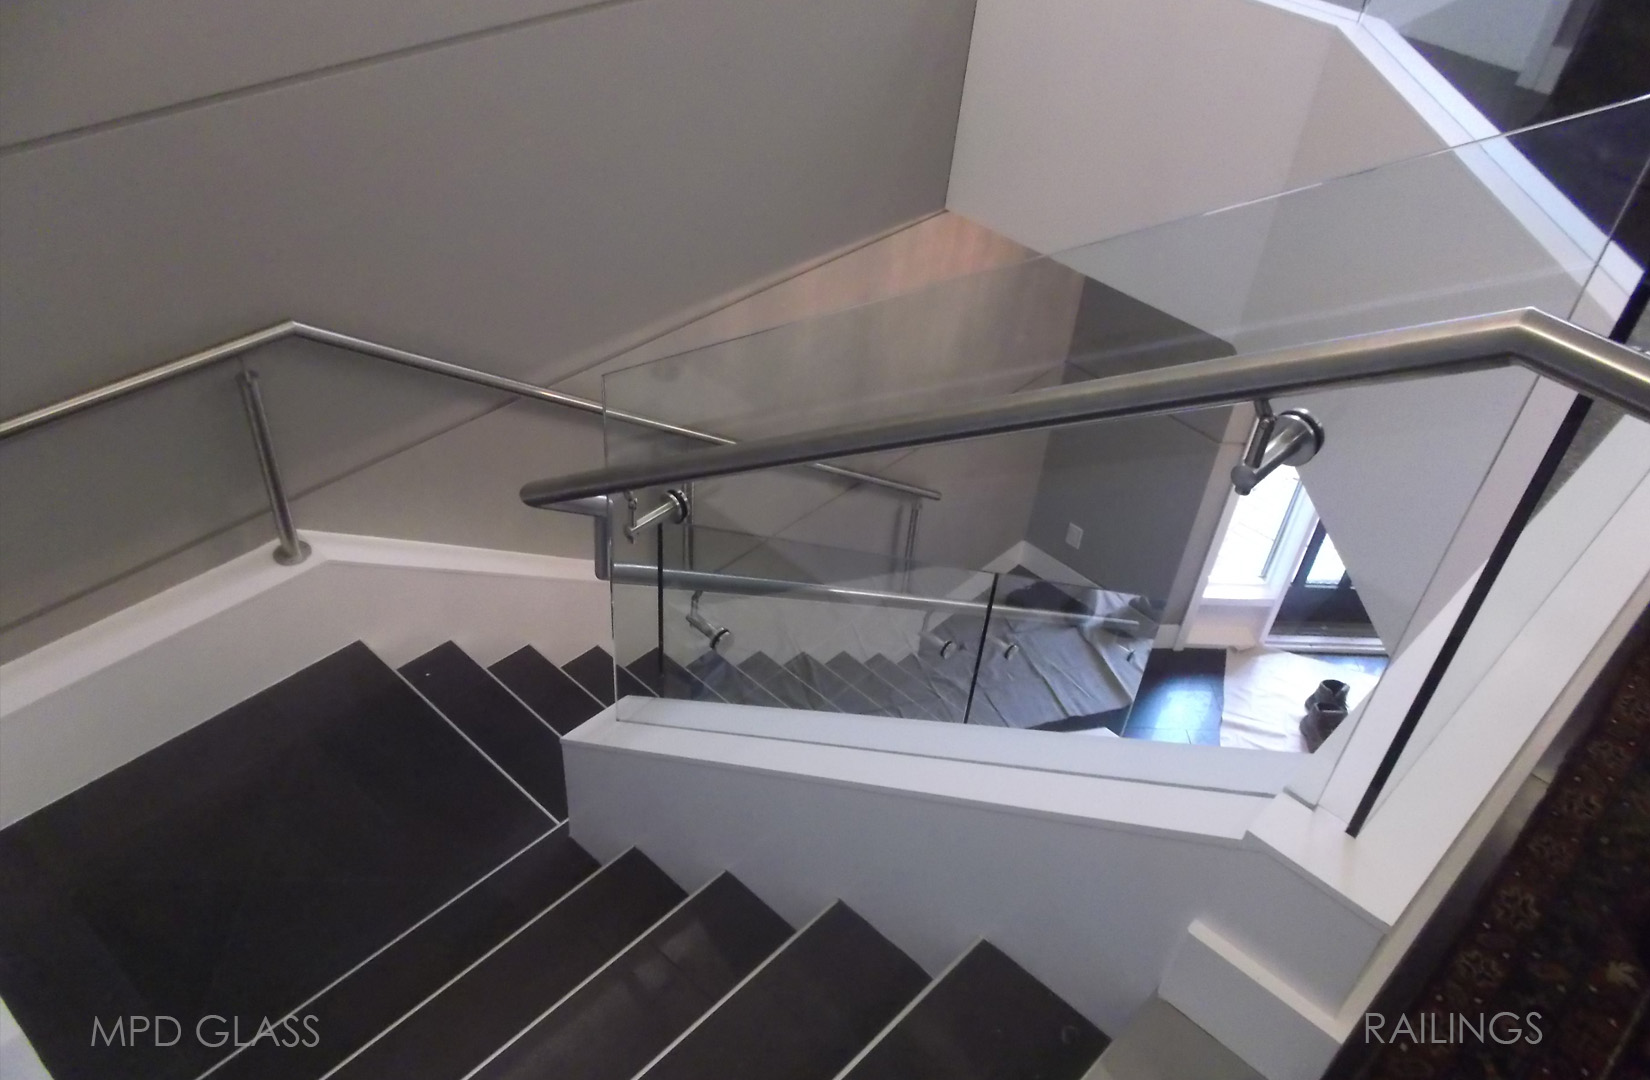  Custom Base Shoe System with Stainless handrail